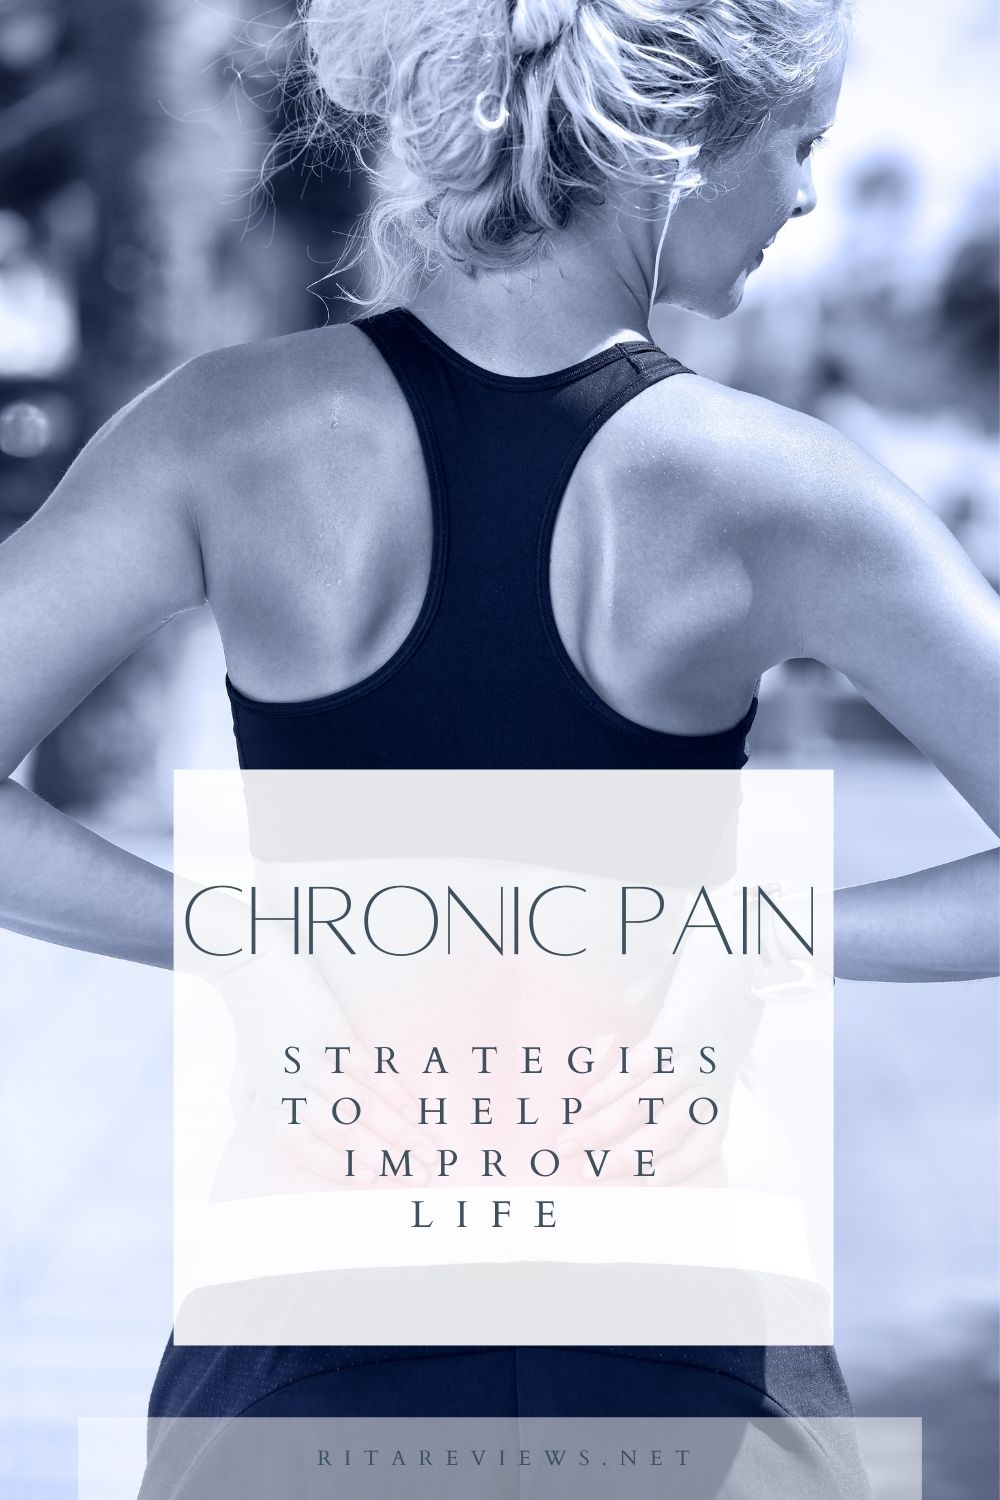 Strategies to Help to Improve Life with Chronic Pain